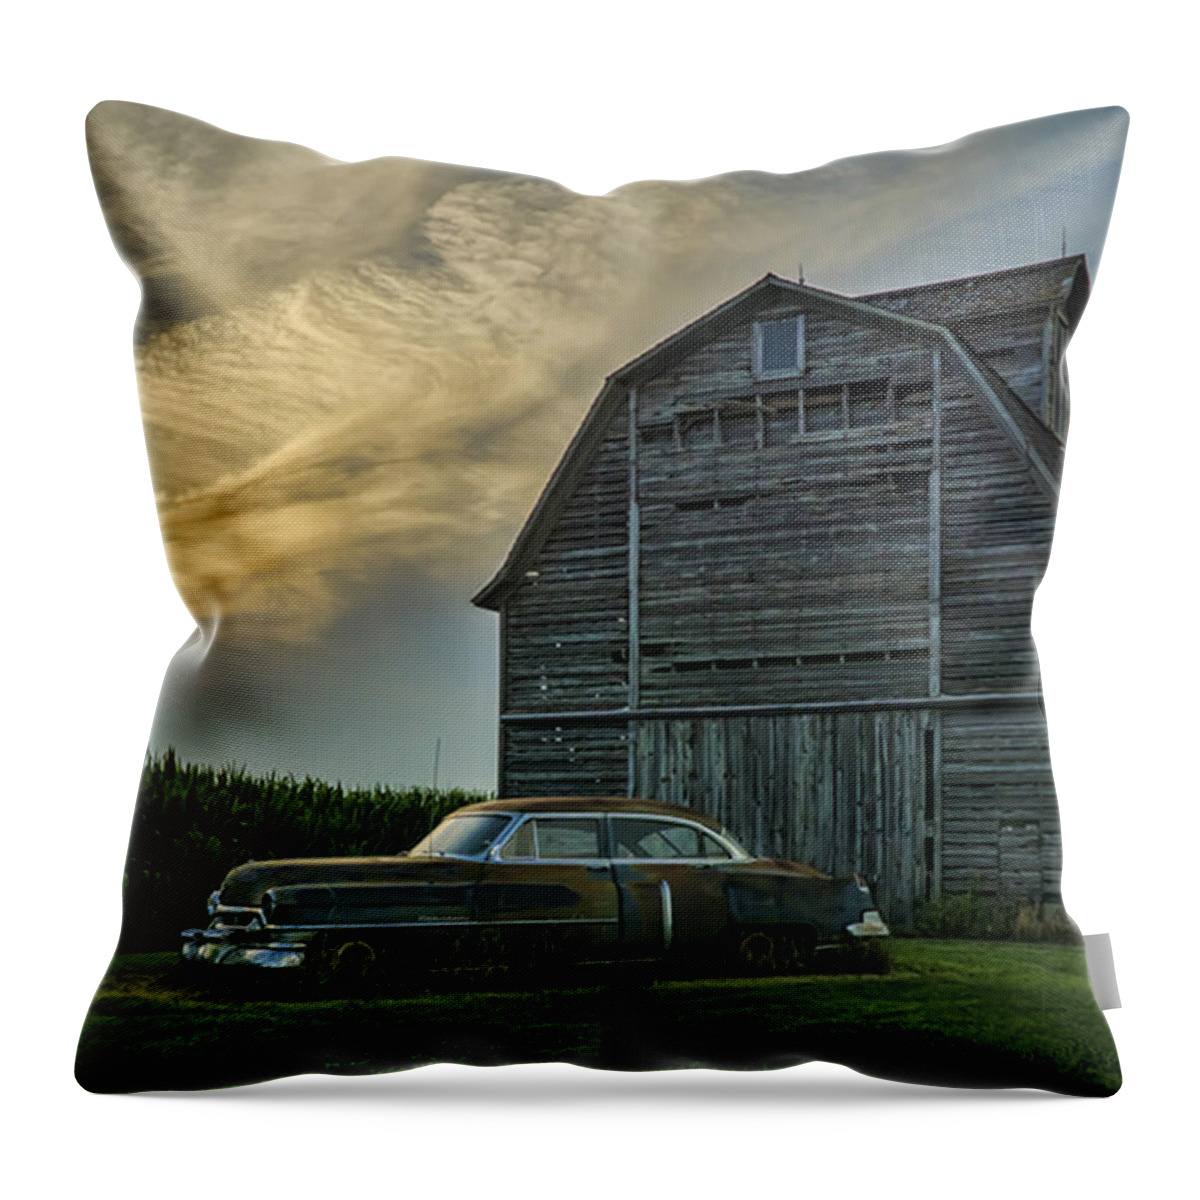 Cadillac Throw Pillow featuring the photograph An Old Cadillac by a barn and cornfield by Sven Brogren